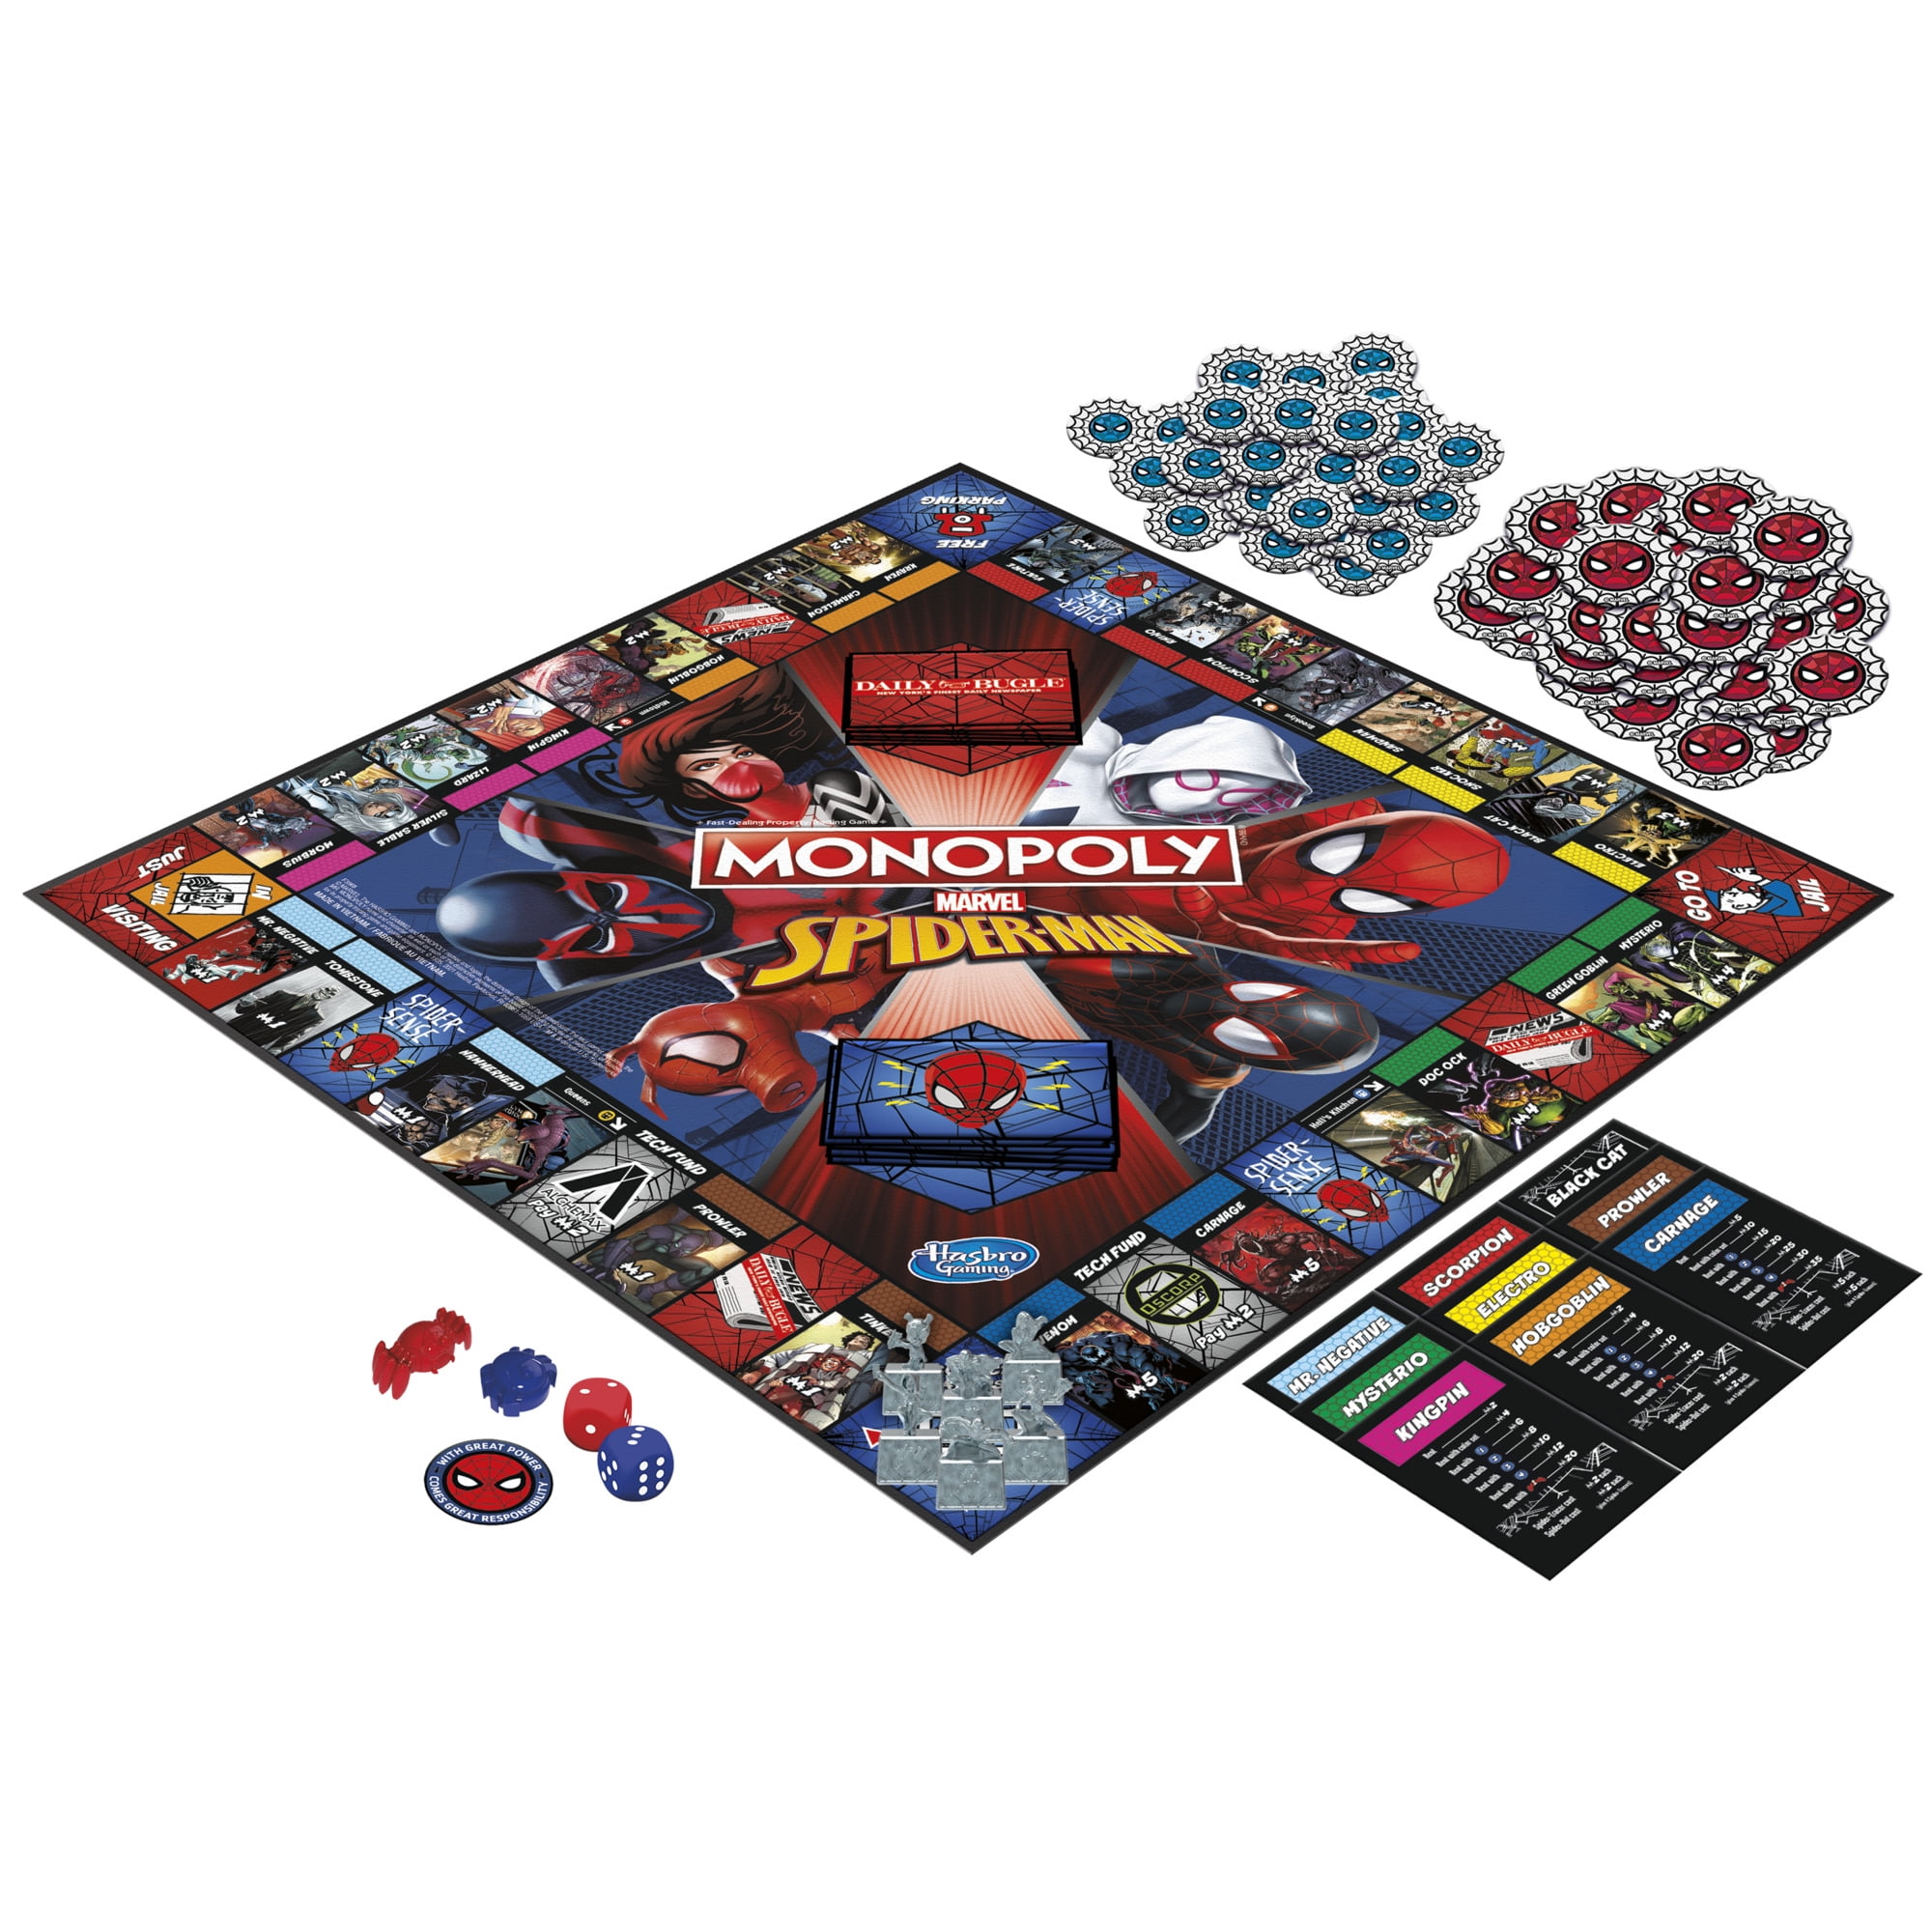 Monopoly Spiderman 3 Movie Translucent Red & Blue Dice Replacement Game Part